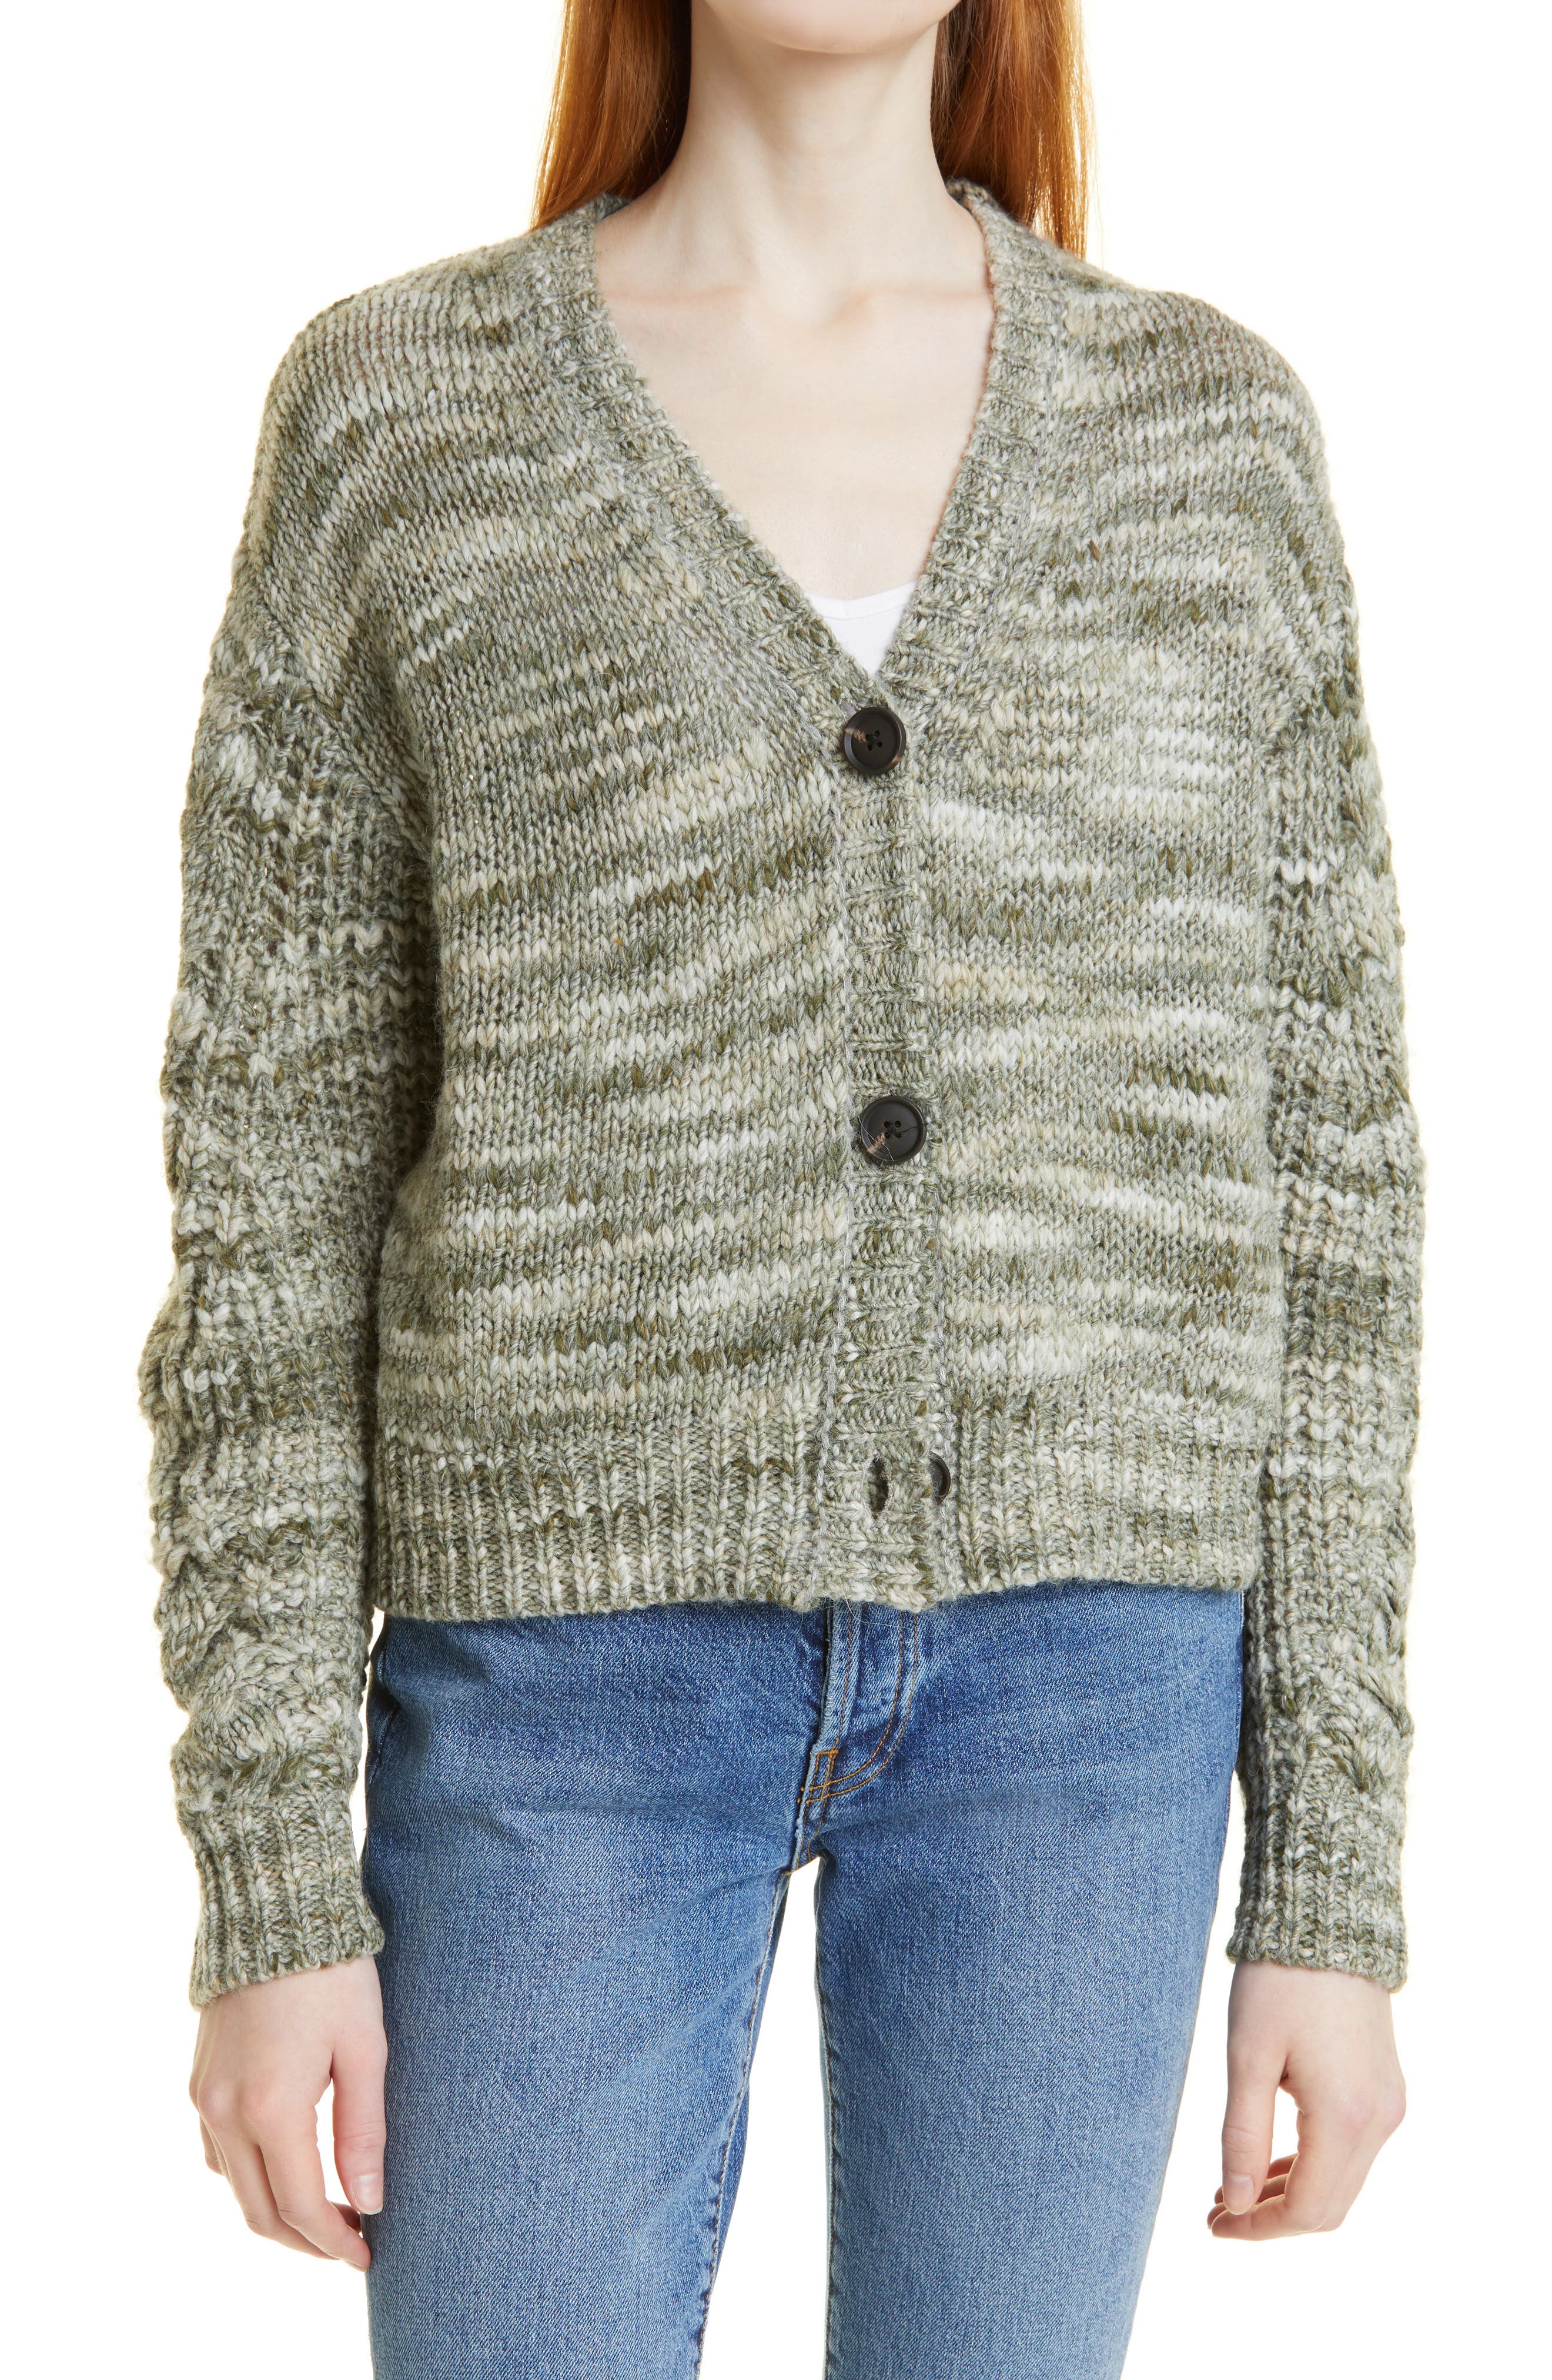 LINE Evelyn Cardigan in Green Lily at Nordstrom